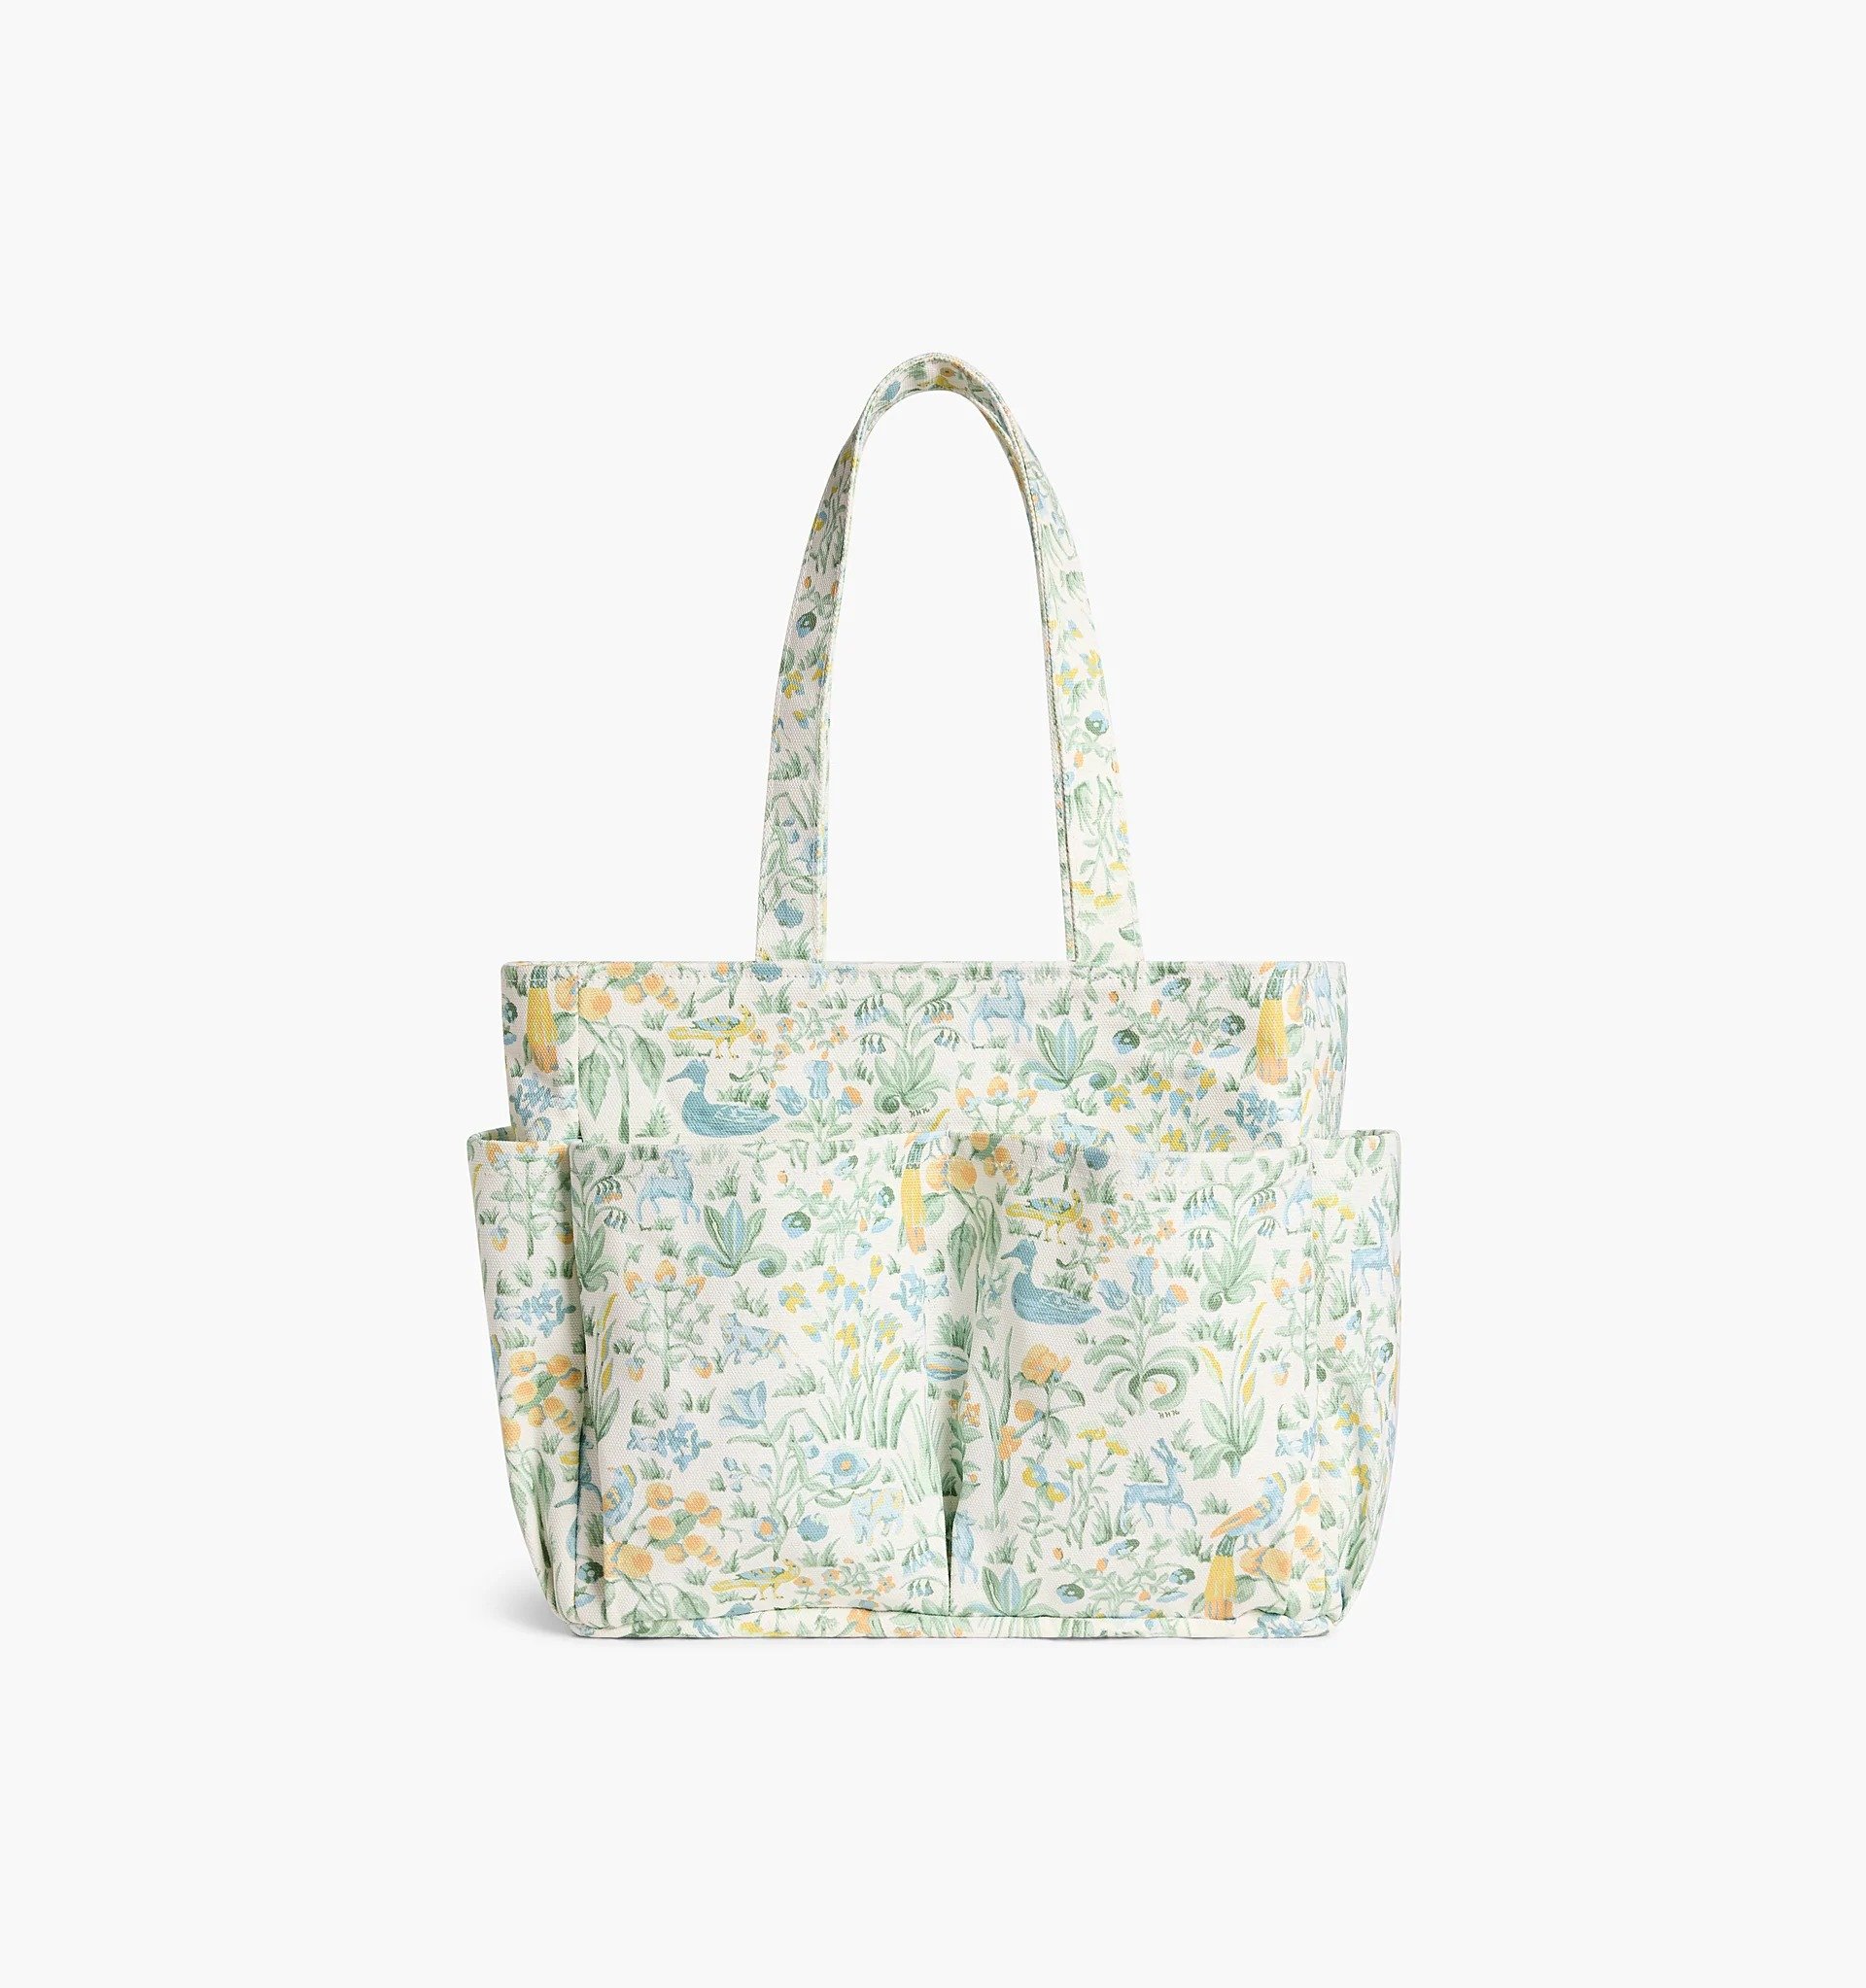 whimsical market tote bag from Hill House